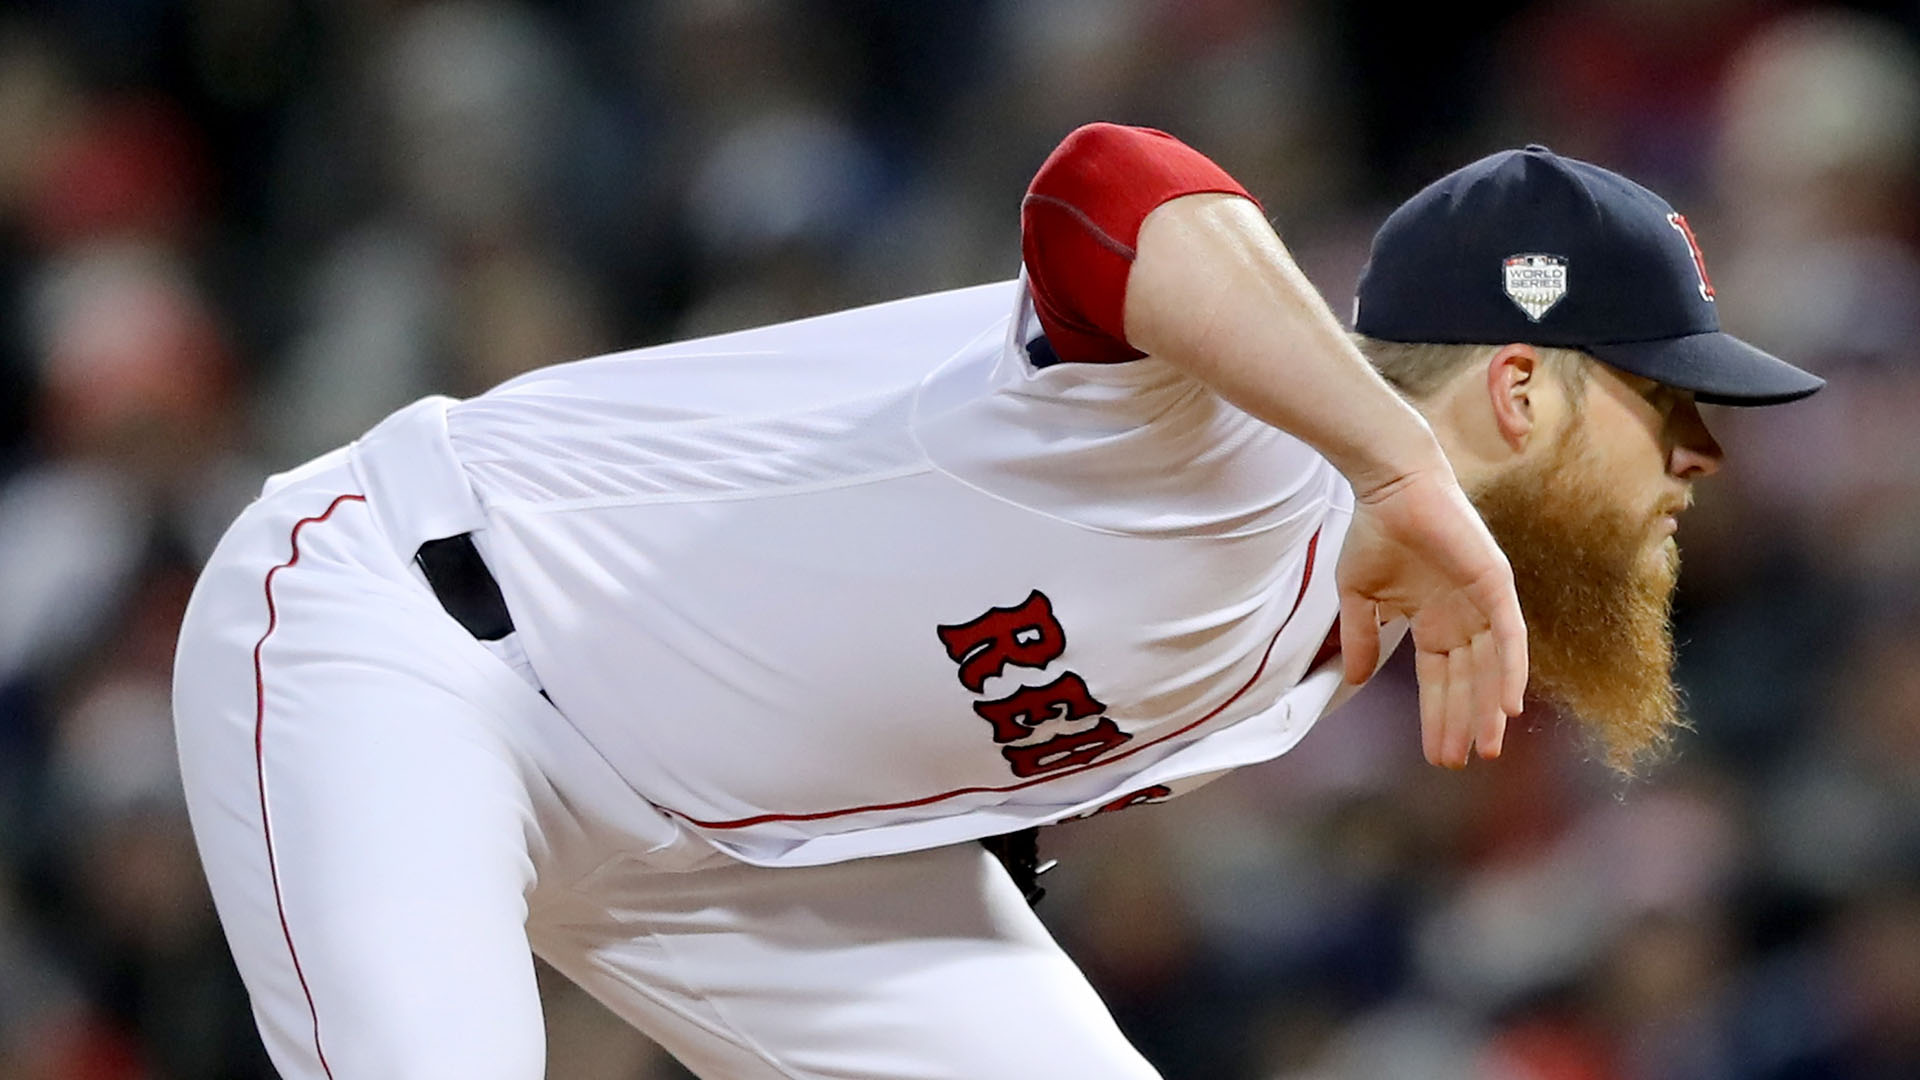 Kimbrel, a free agent, is reportedly seeking a six-year contract worth more than $100 million, which would be a record for a closer,